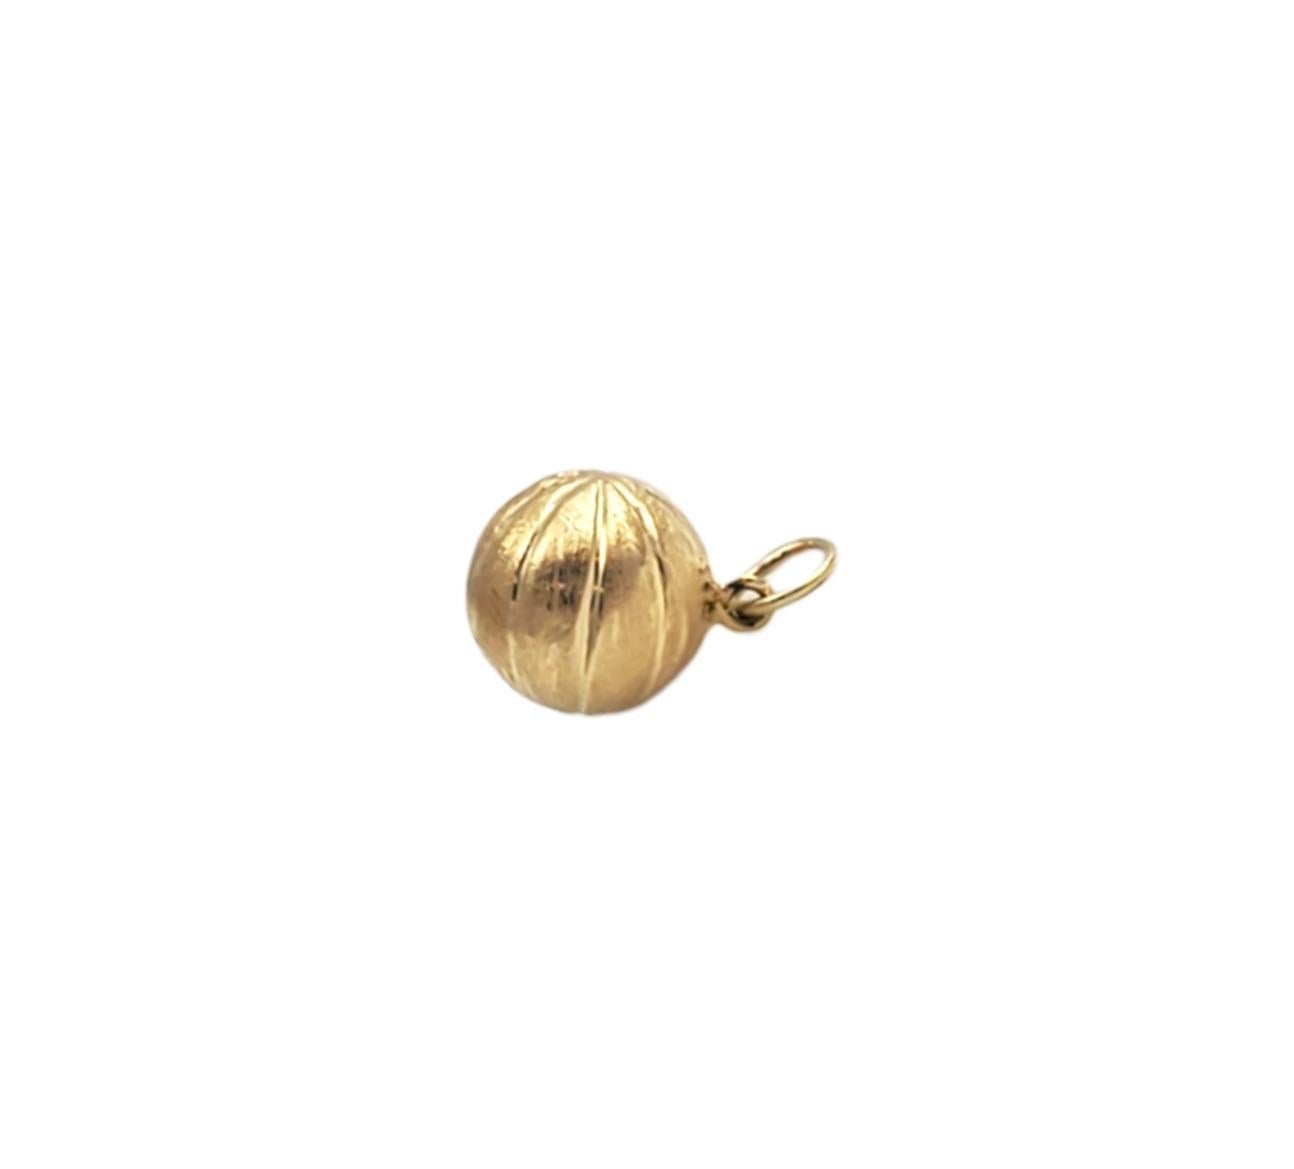 Vintage 14 Karat Yellow Gold Basketball Pendant -

This lovely basketball charm is crafted in beautifully detailed 14K yellow gold.

Size: 13.2 mm x 13.2 mm

Stamped: 14K

Weight: 0.6 gr./ 0.3 dwt.

Chain not included.

Very good condition,